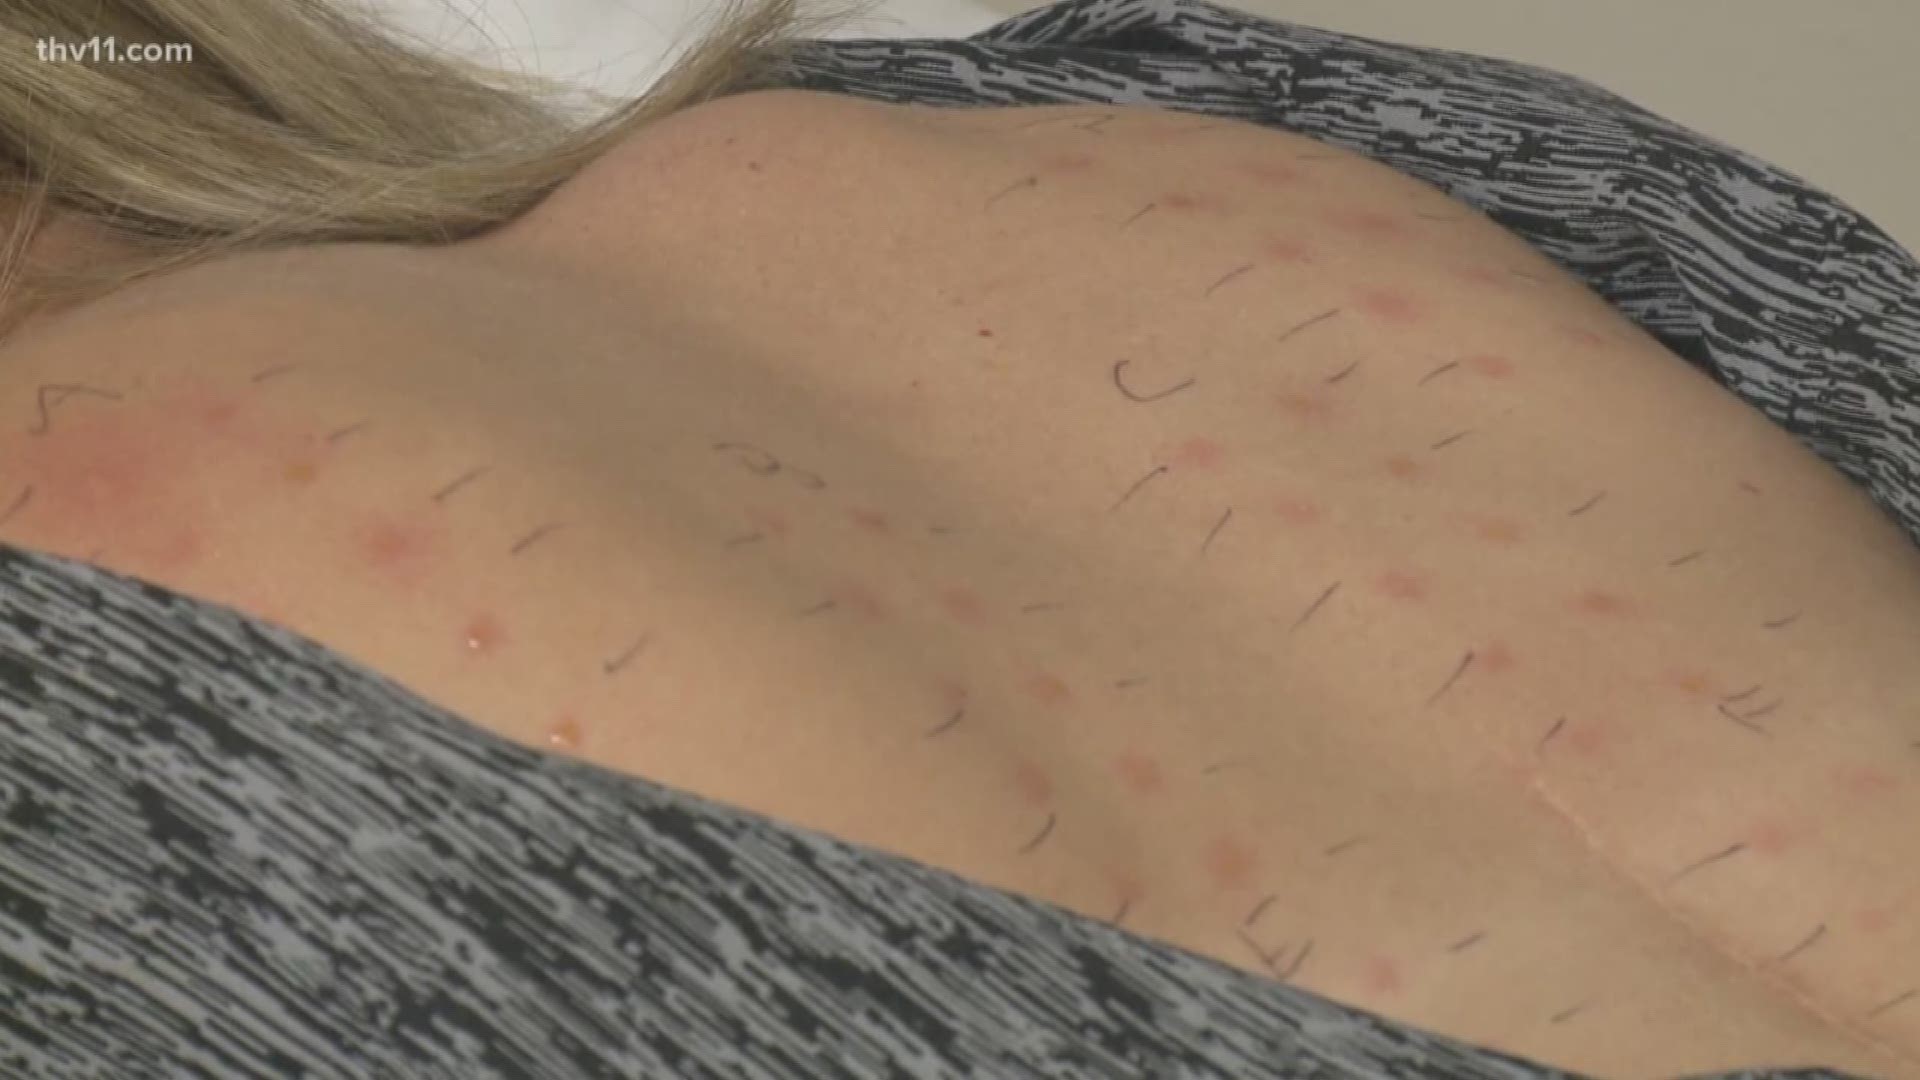 You think you're allergic after sneezing a billion times? Well, Laura and Mariel got an allergy test and the results aren't what they thought it would be.